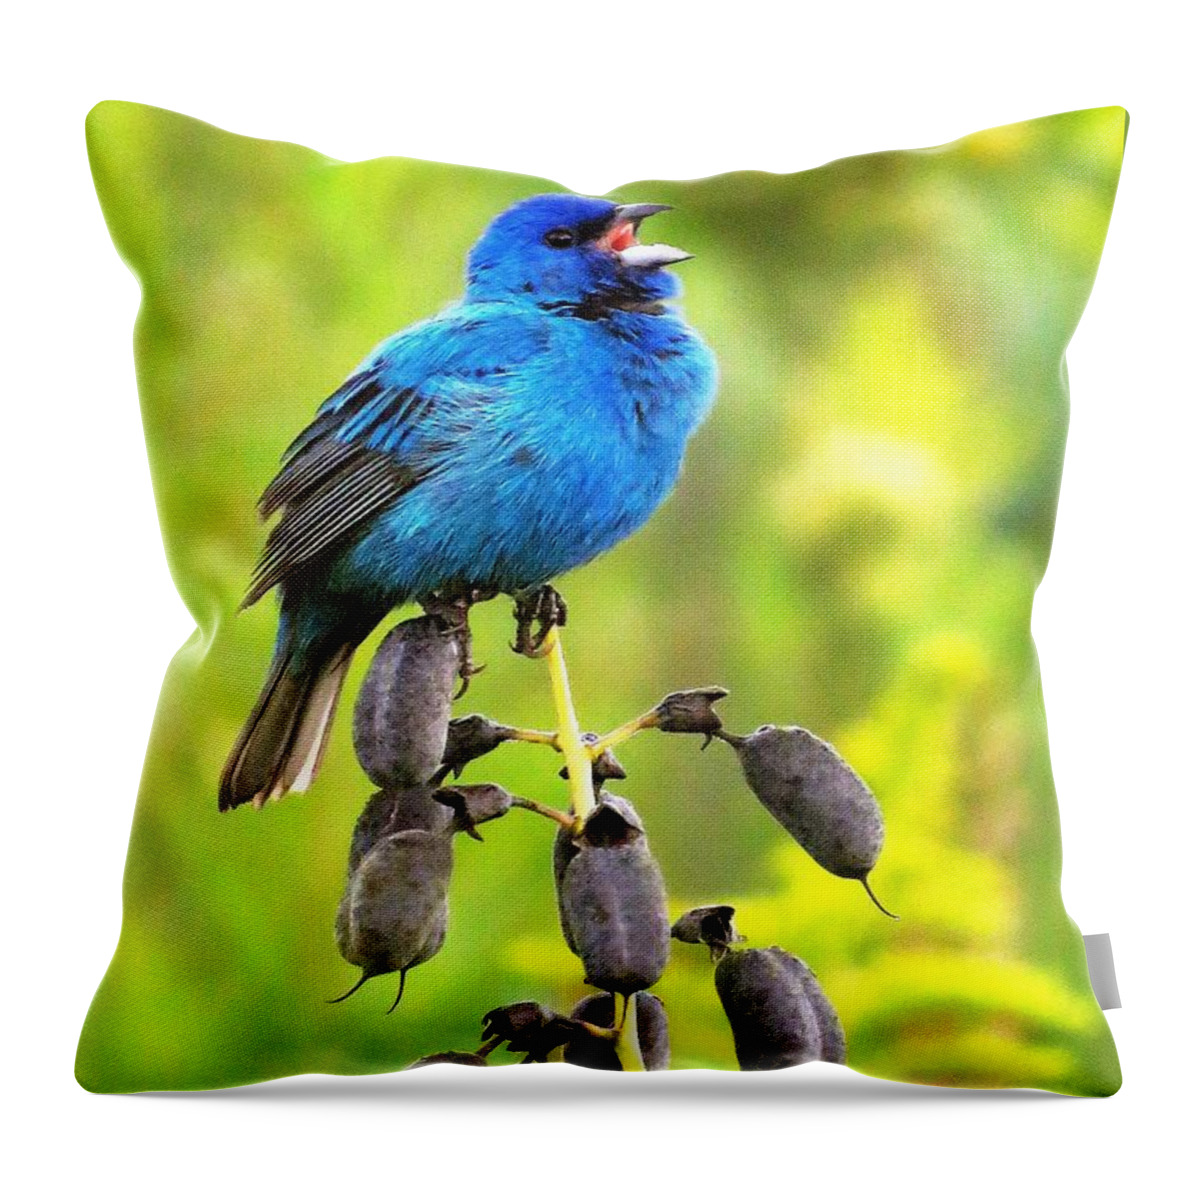 Birds Throw Pillow featuring the photograph Singing From His Heart by Lori Frisch